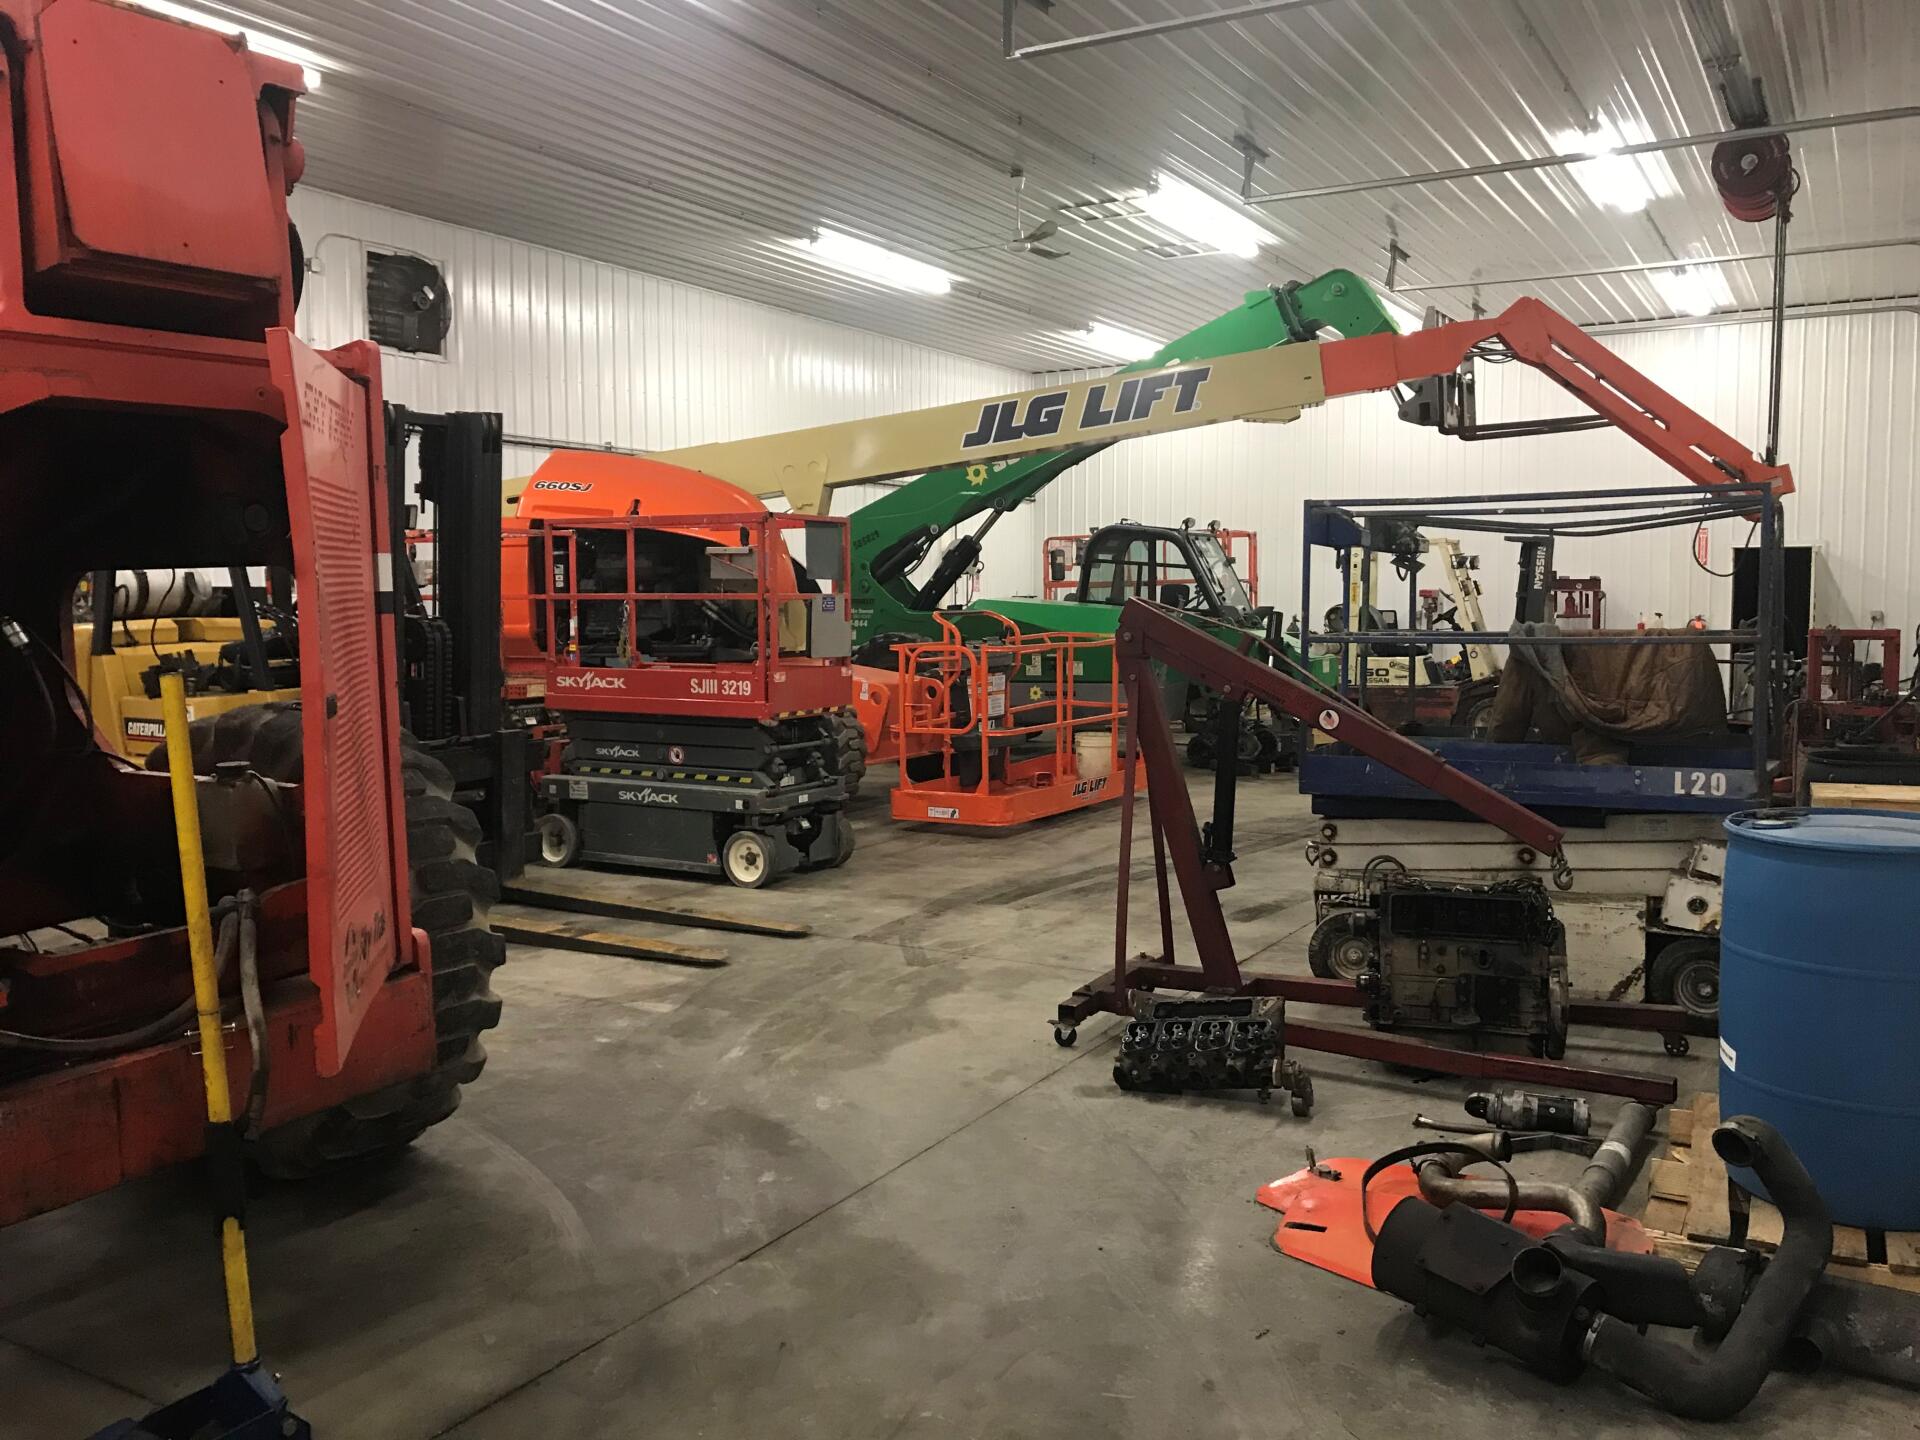 JLG lift service done by Northern Ohio Equipment Services in Medina, Ohio